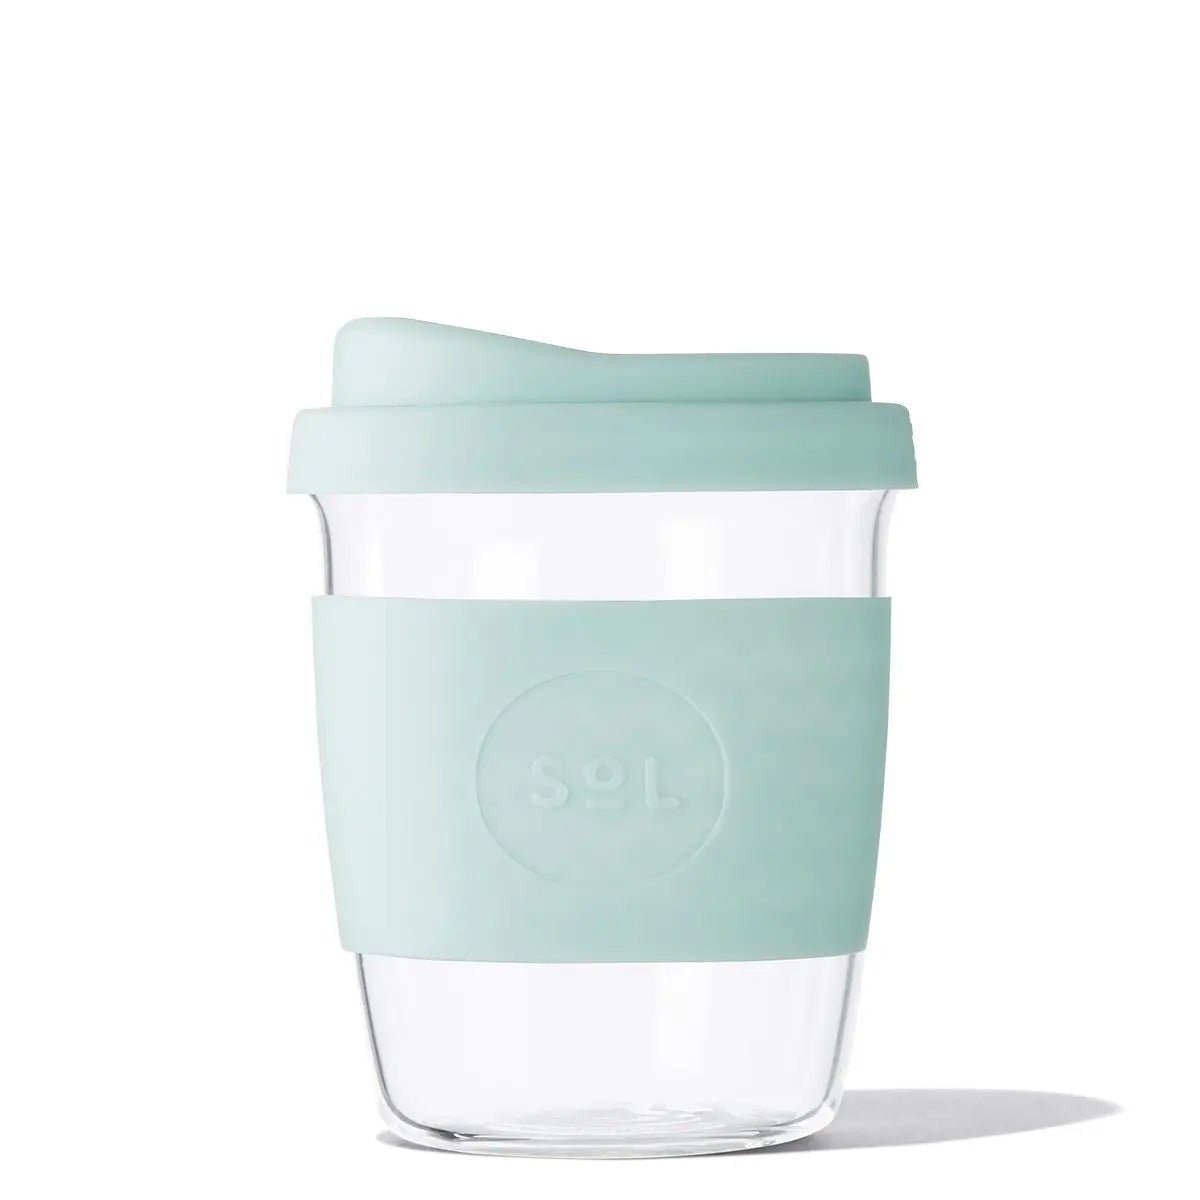 Reusable To-Go Glass & Silicone Cup 8 oz - Cool Cyan - Earth Ahead